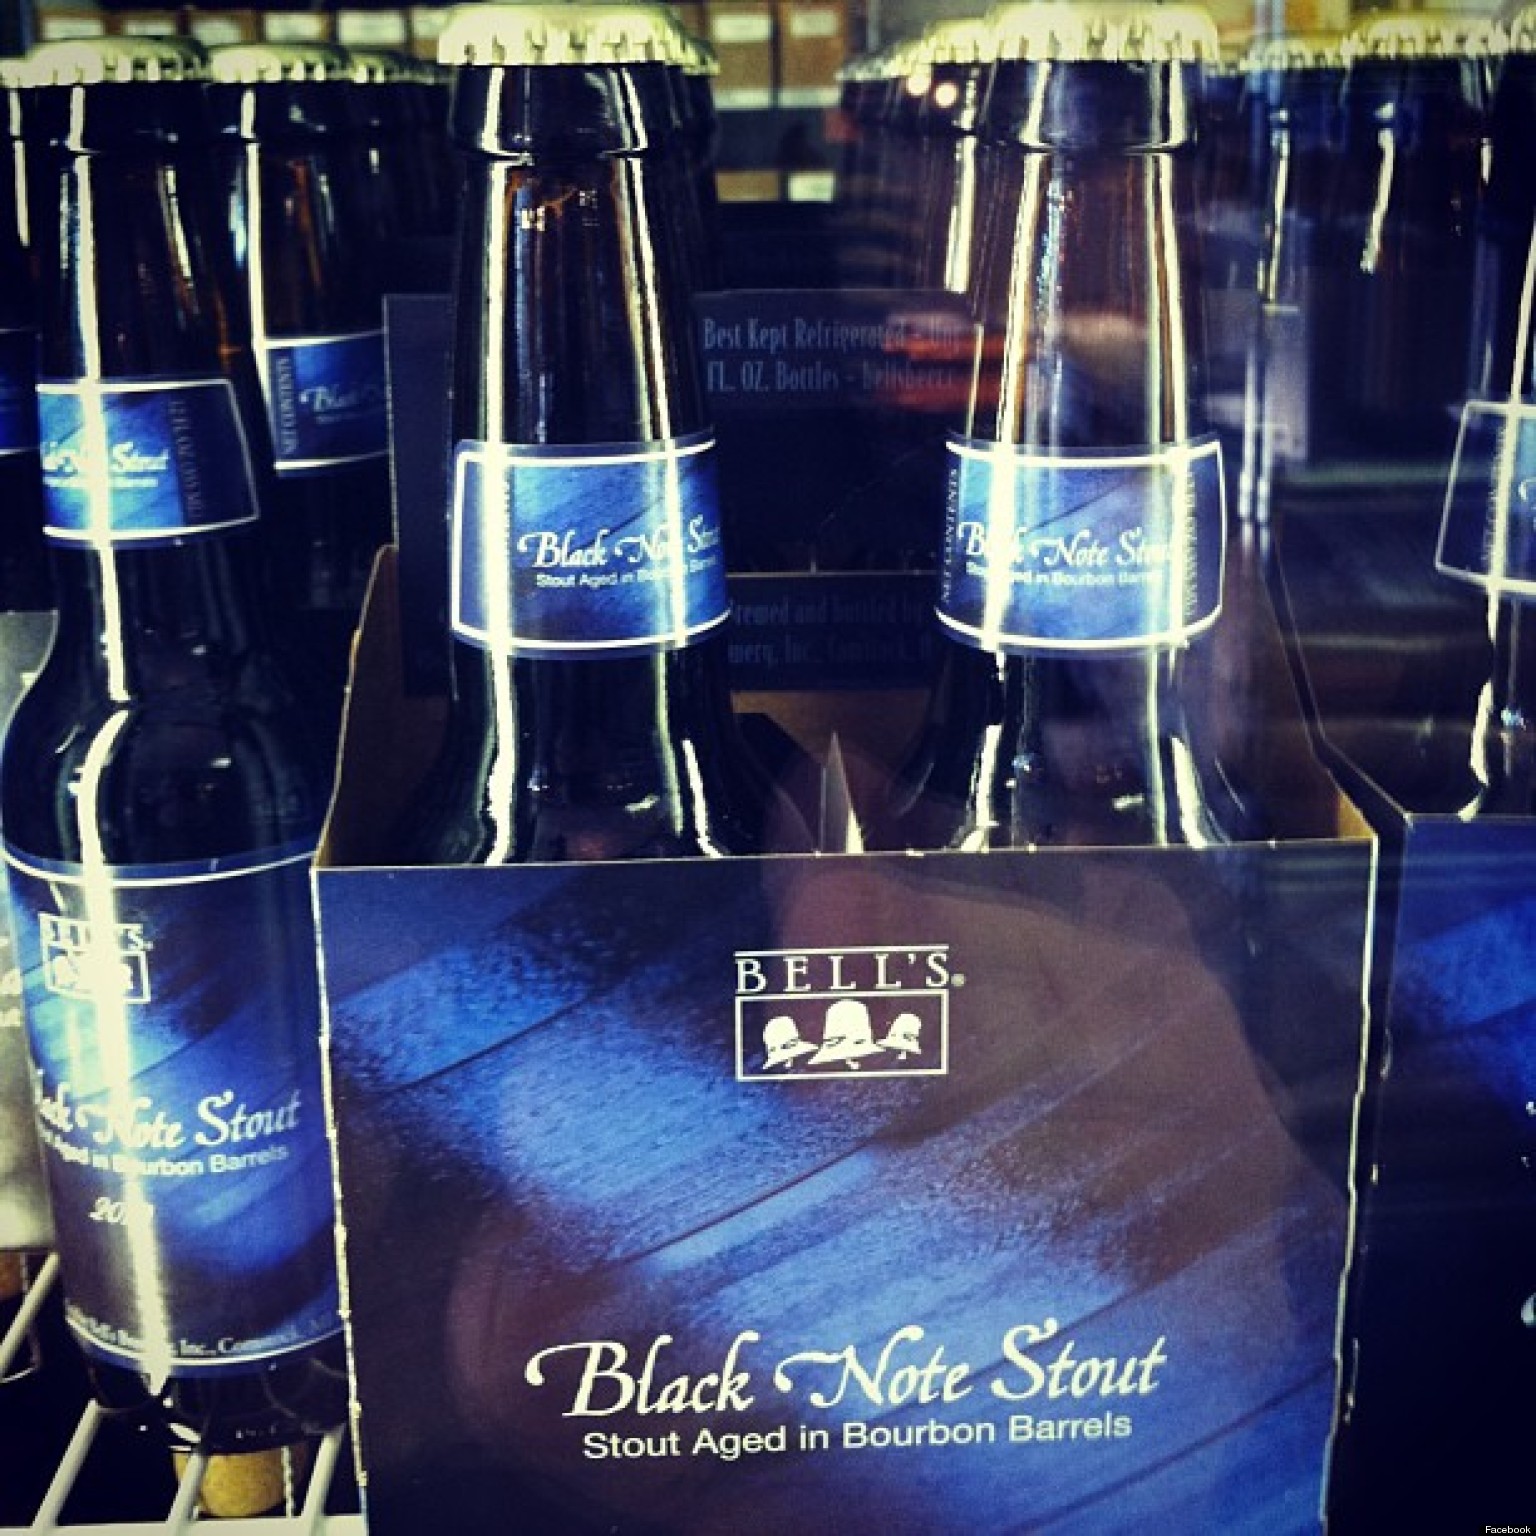 Bell's Black Note Stout, HighlySought Michigan Craft Beer, To Hit